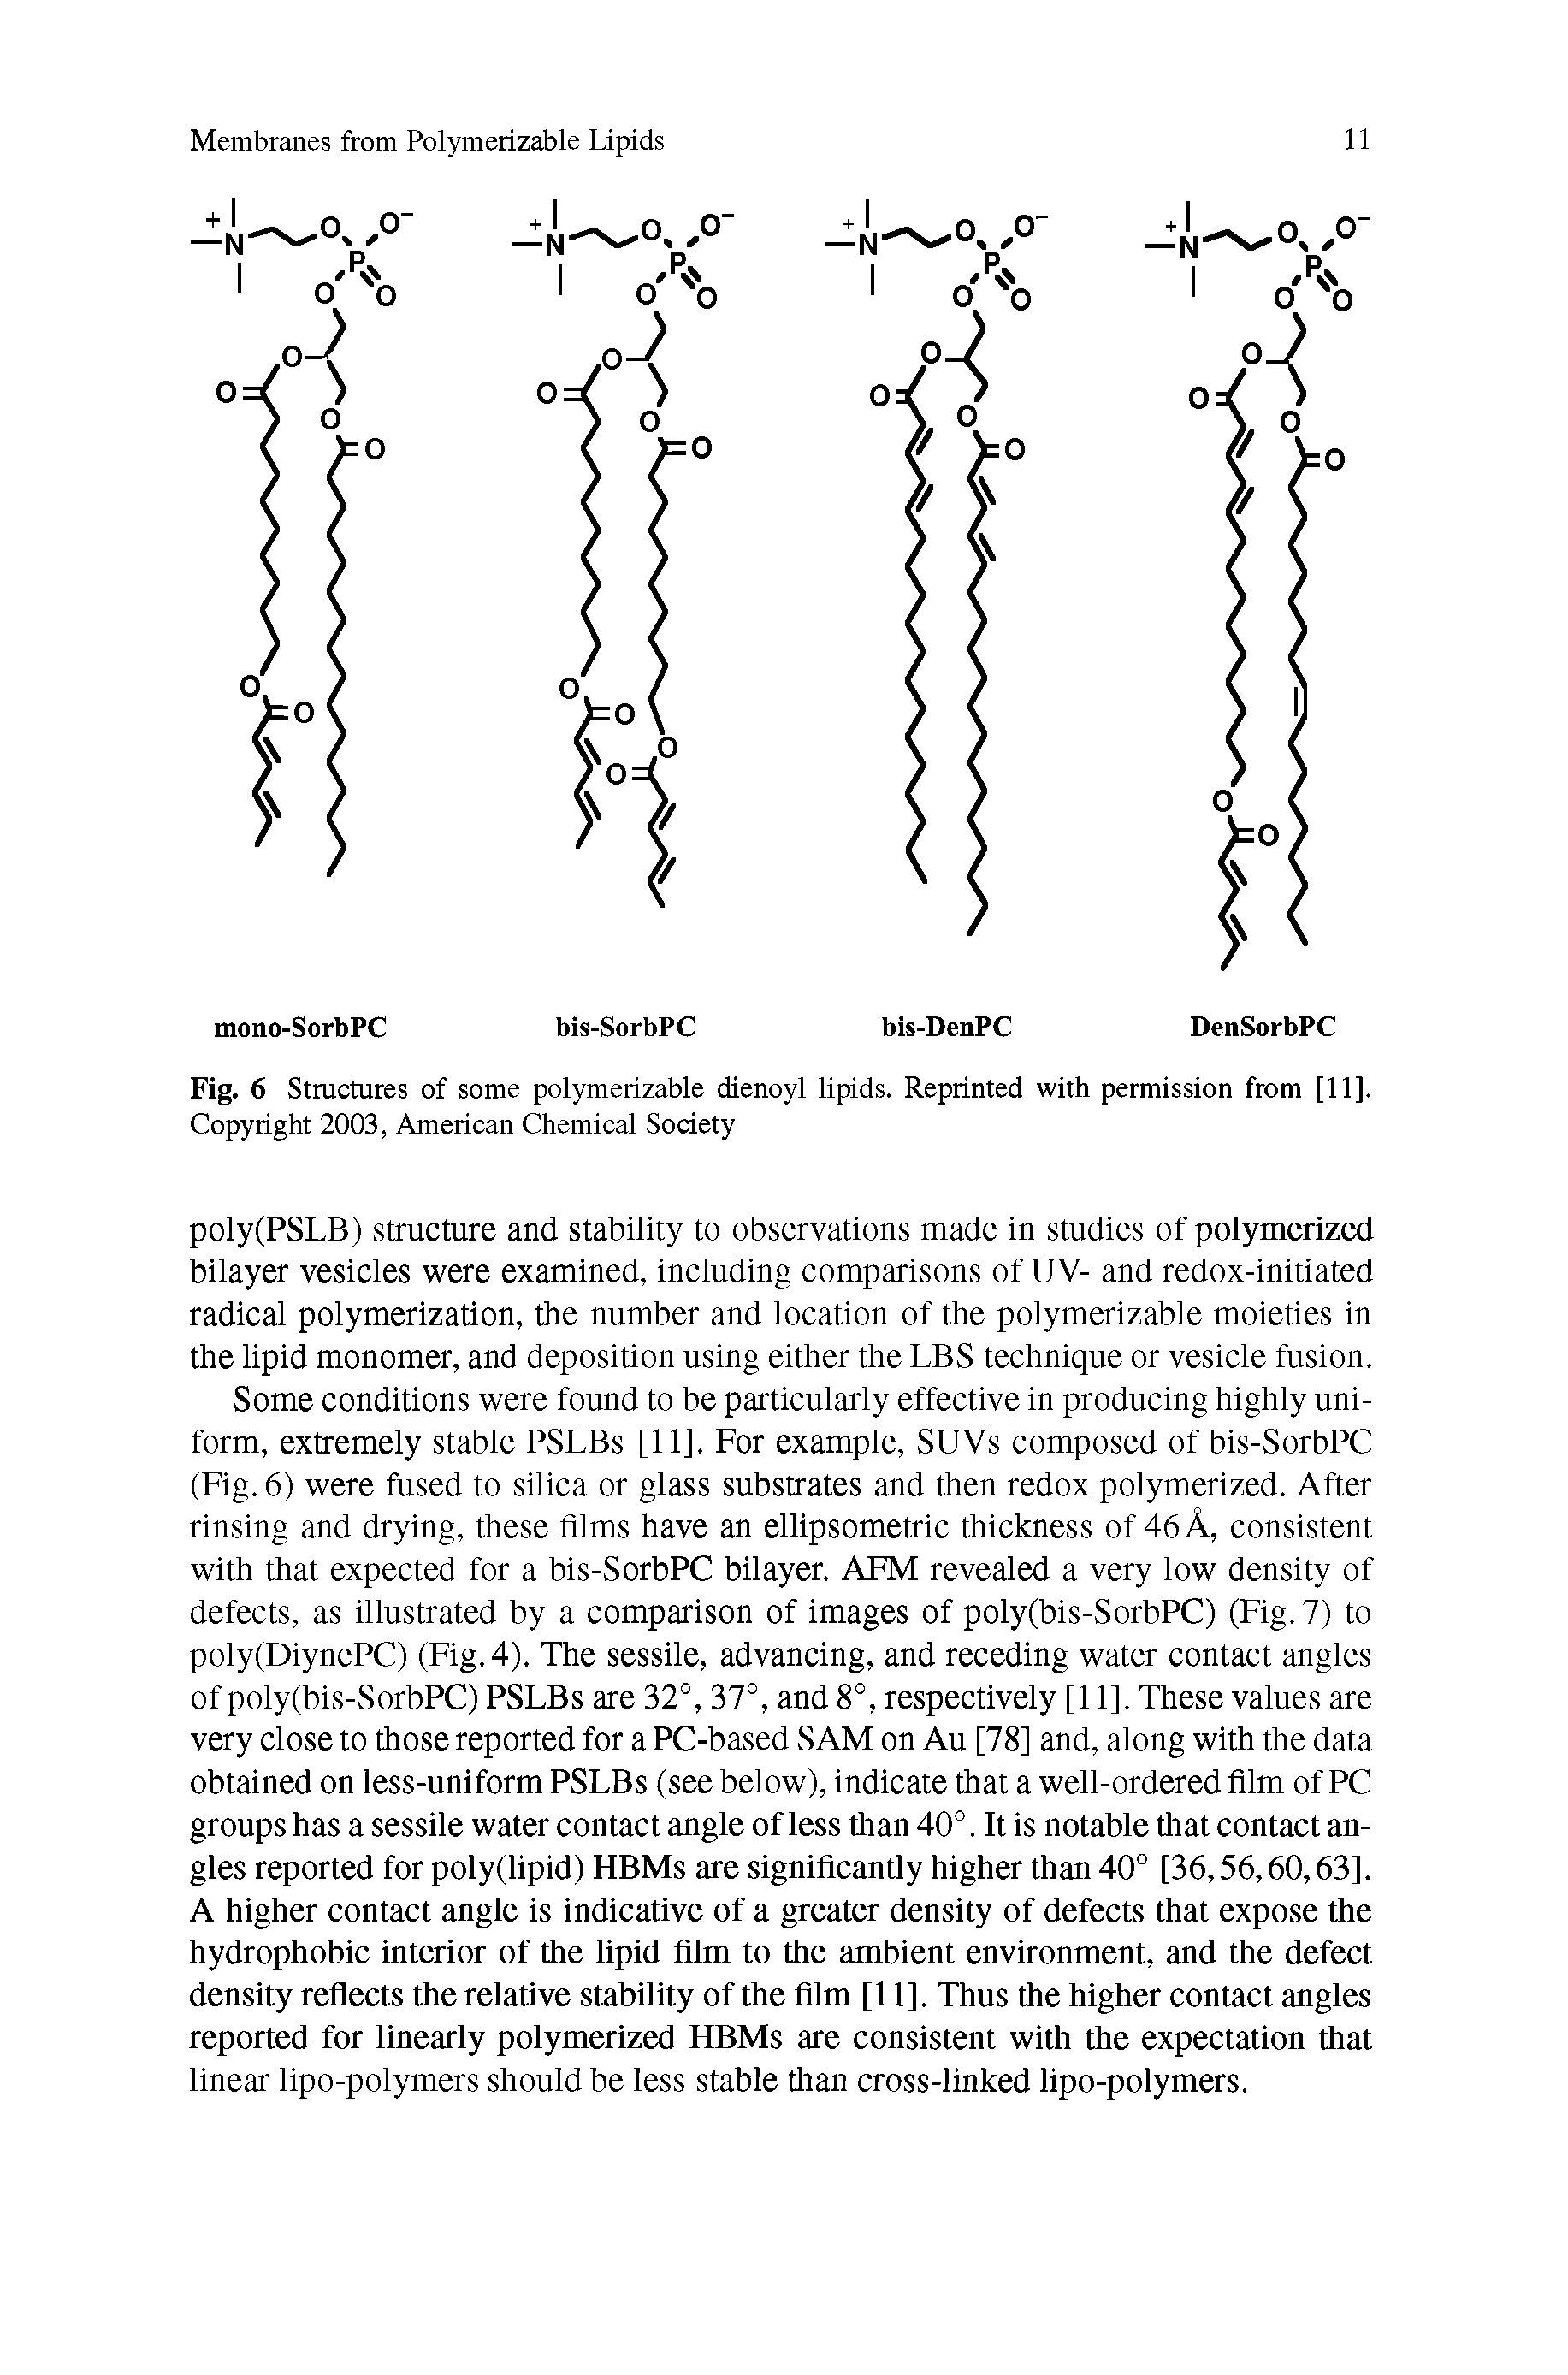 Fig. 6 Structures of some polymerizable dienoyl lipids. Reprinted with permission from [11]. Copyright 2003, American Chemical Society...